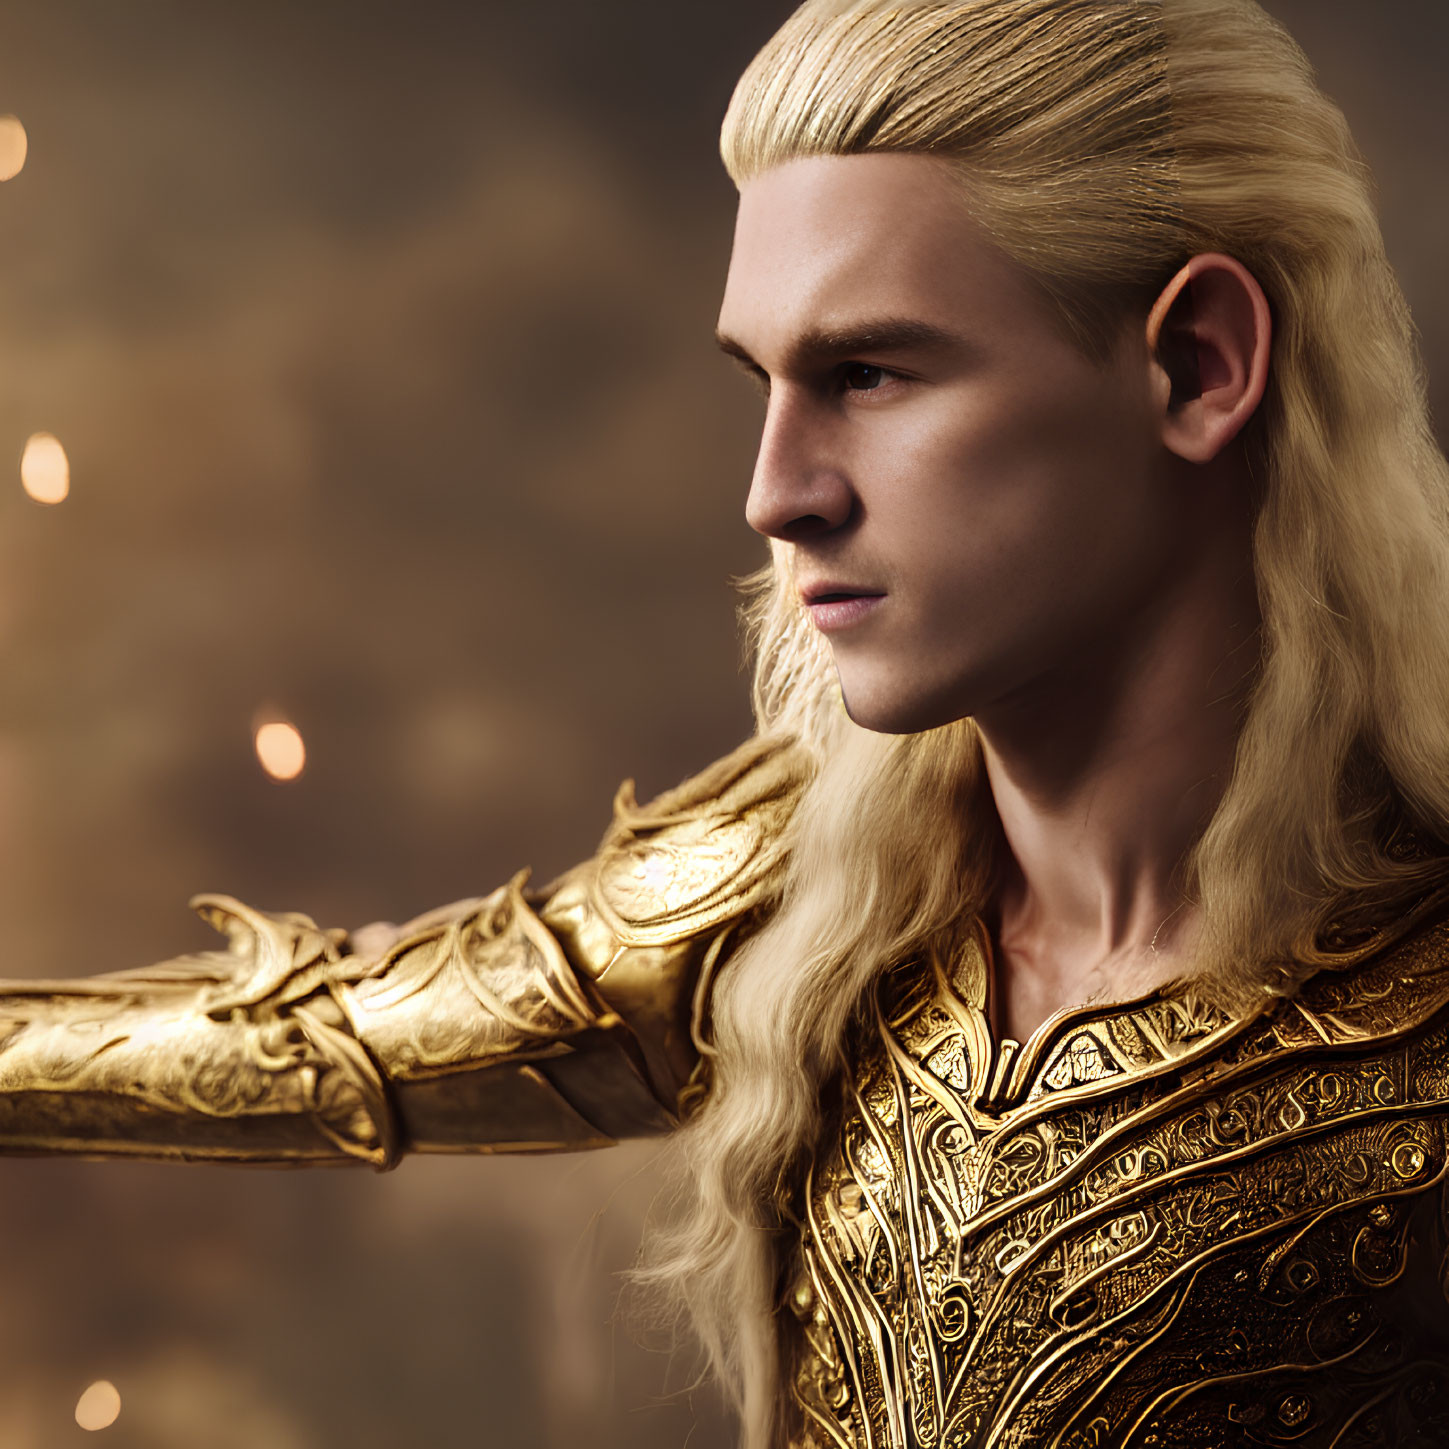 Blond-haired elf in golden armor against glowing embers background